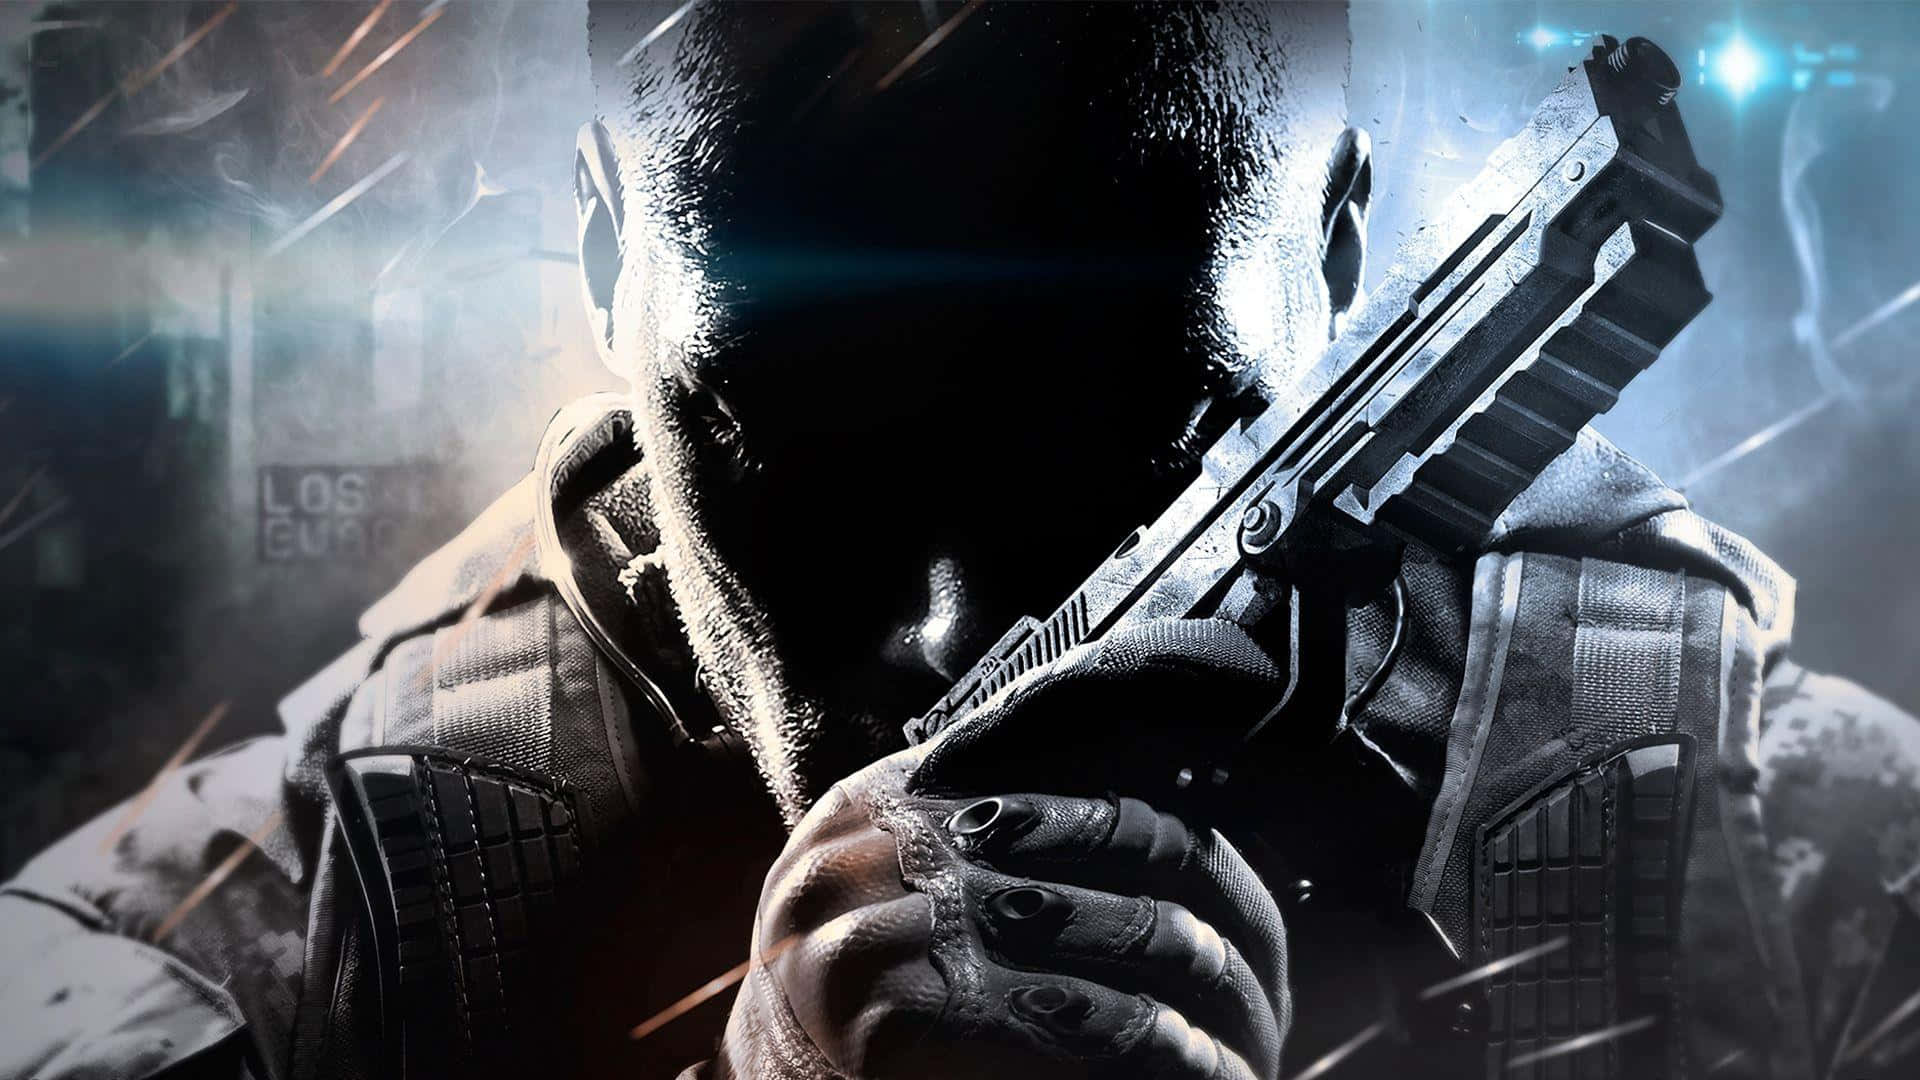 The power of Black Ops Wallpaper